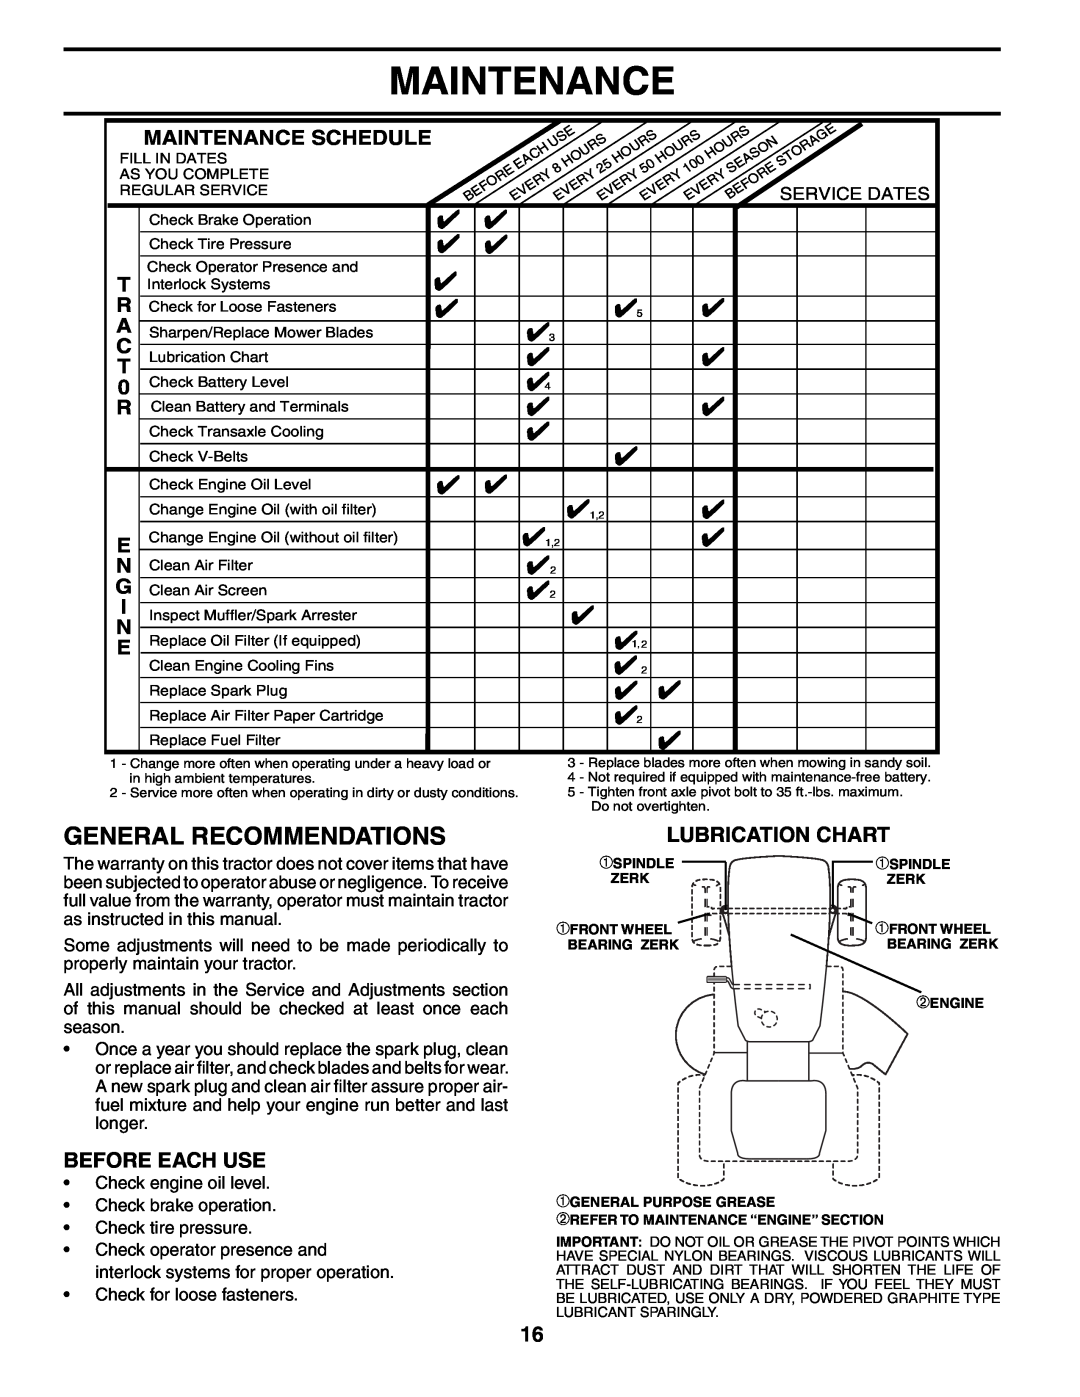 Poulan PD20H42STA owner manual Maintenance, General Recommendations, Lubrication Chart, Before Each Use 